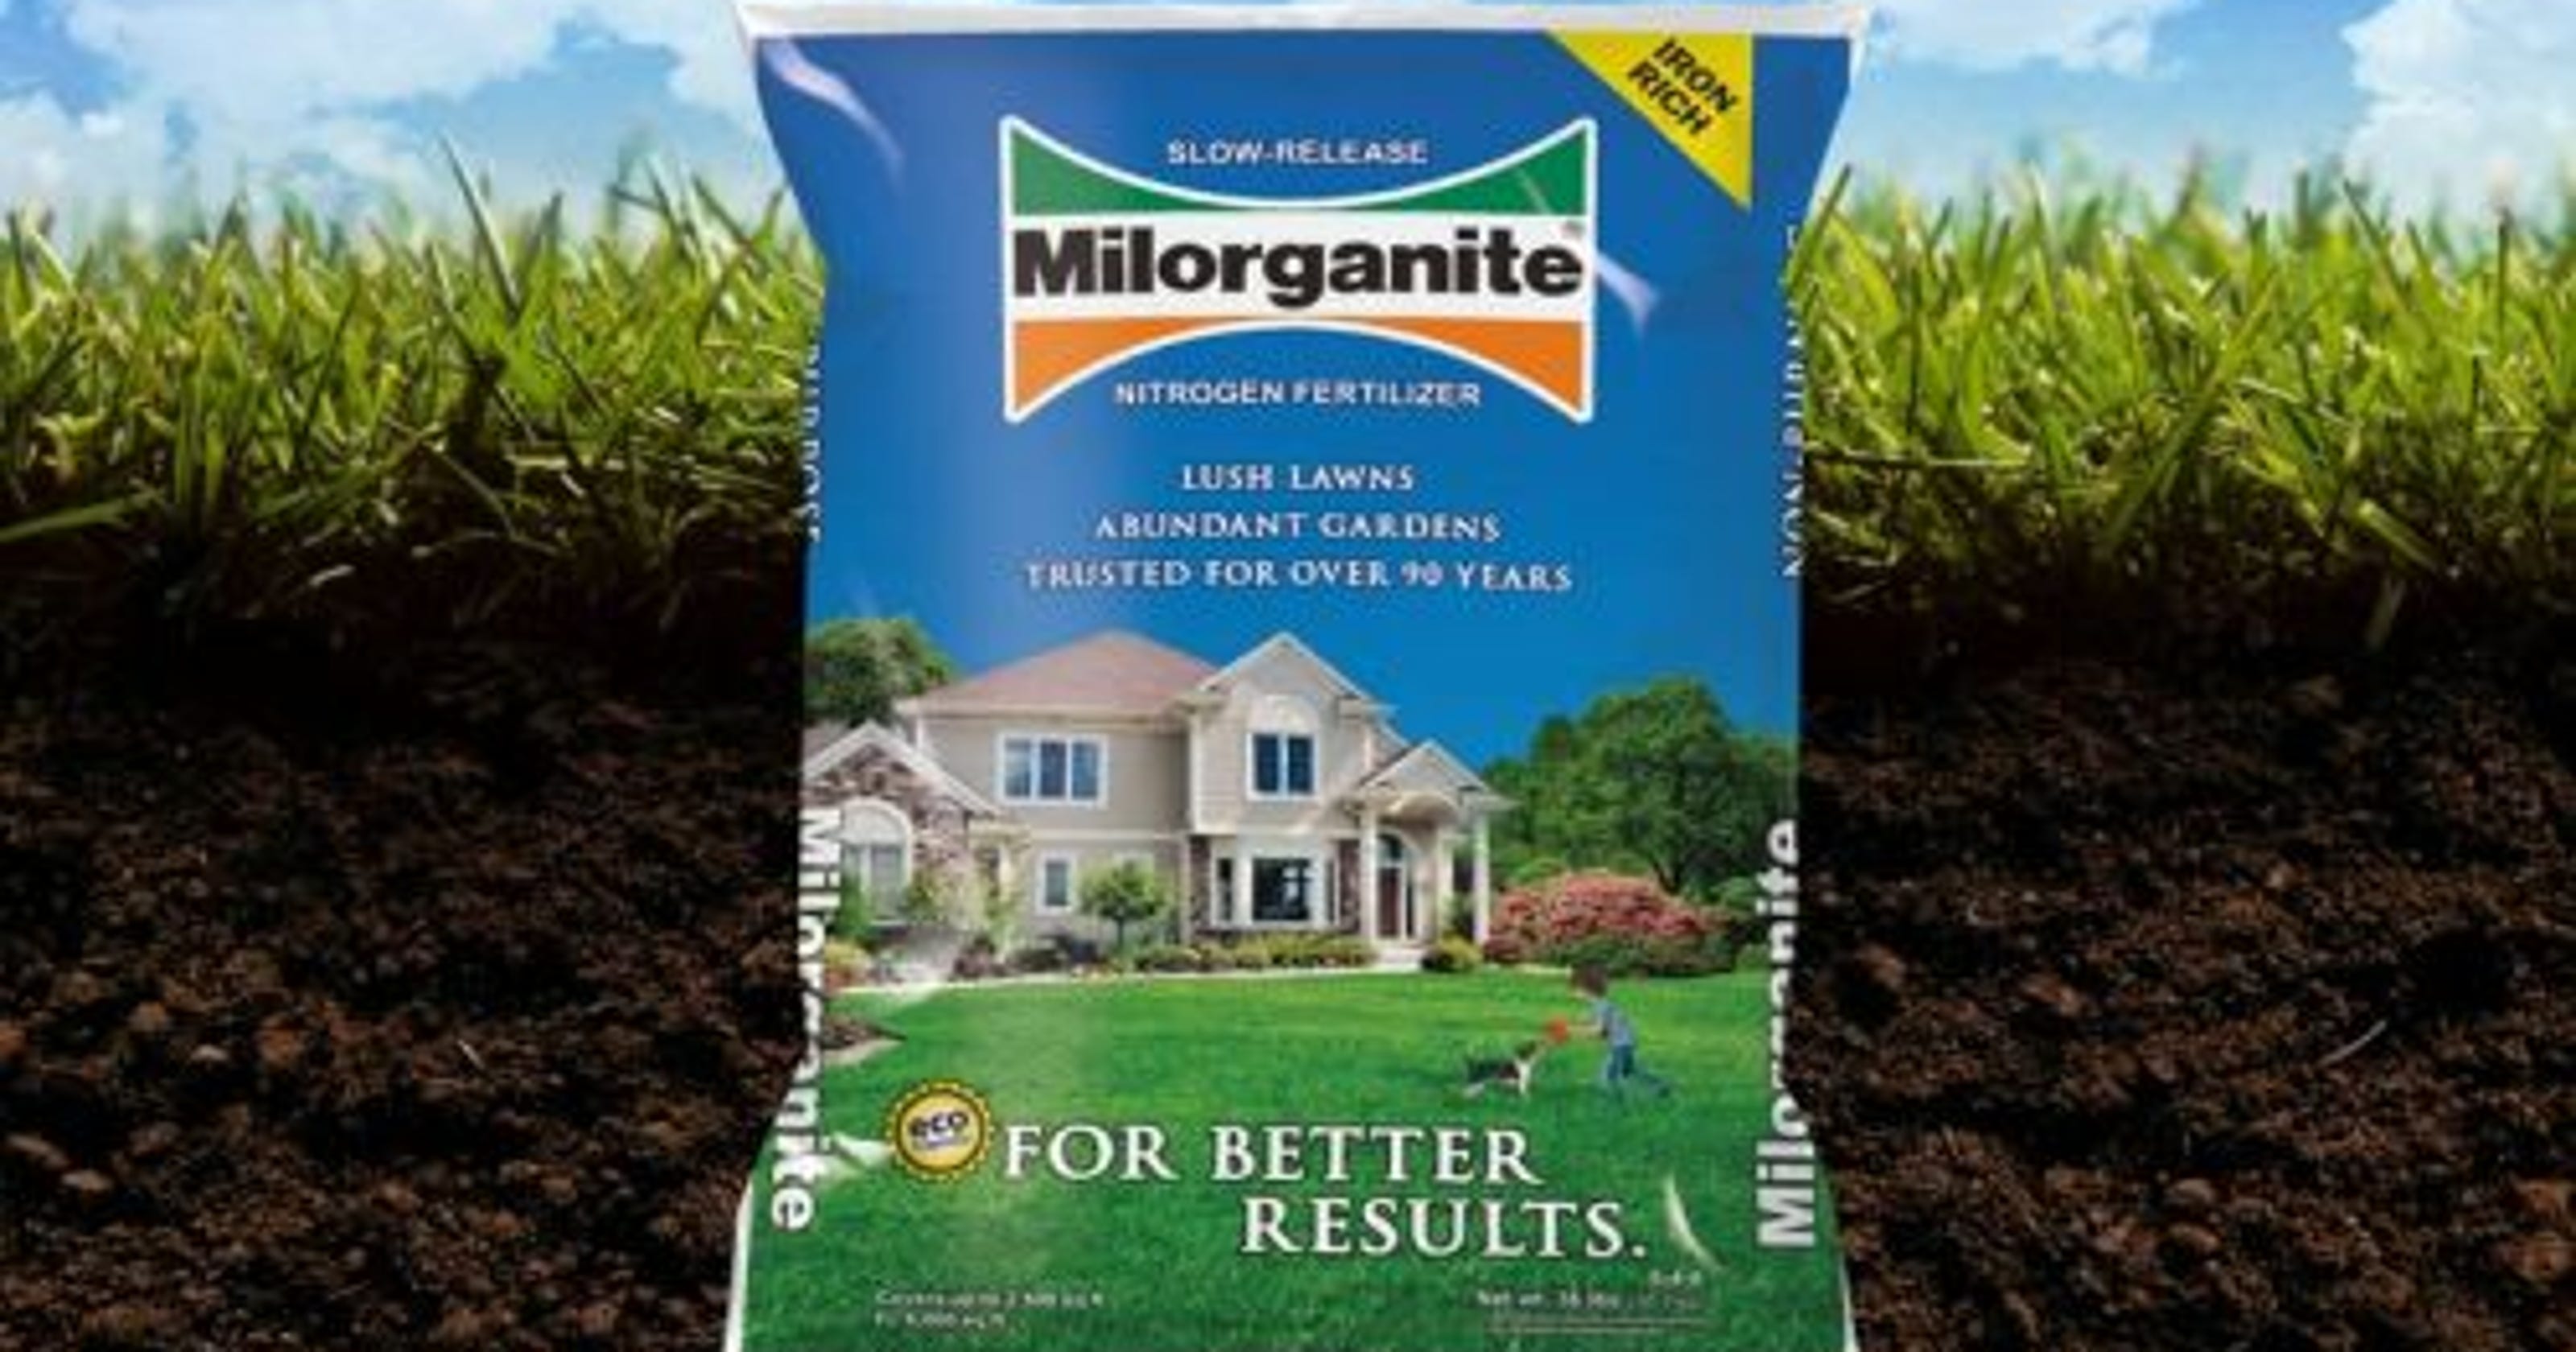 Milorganite made some news when we learned that its odor recently has